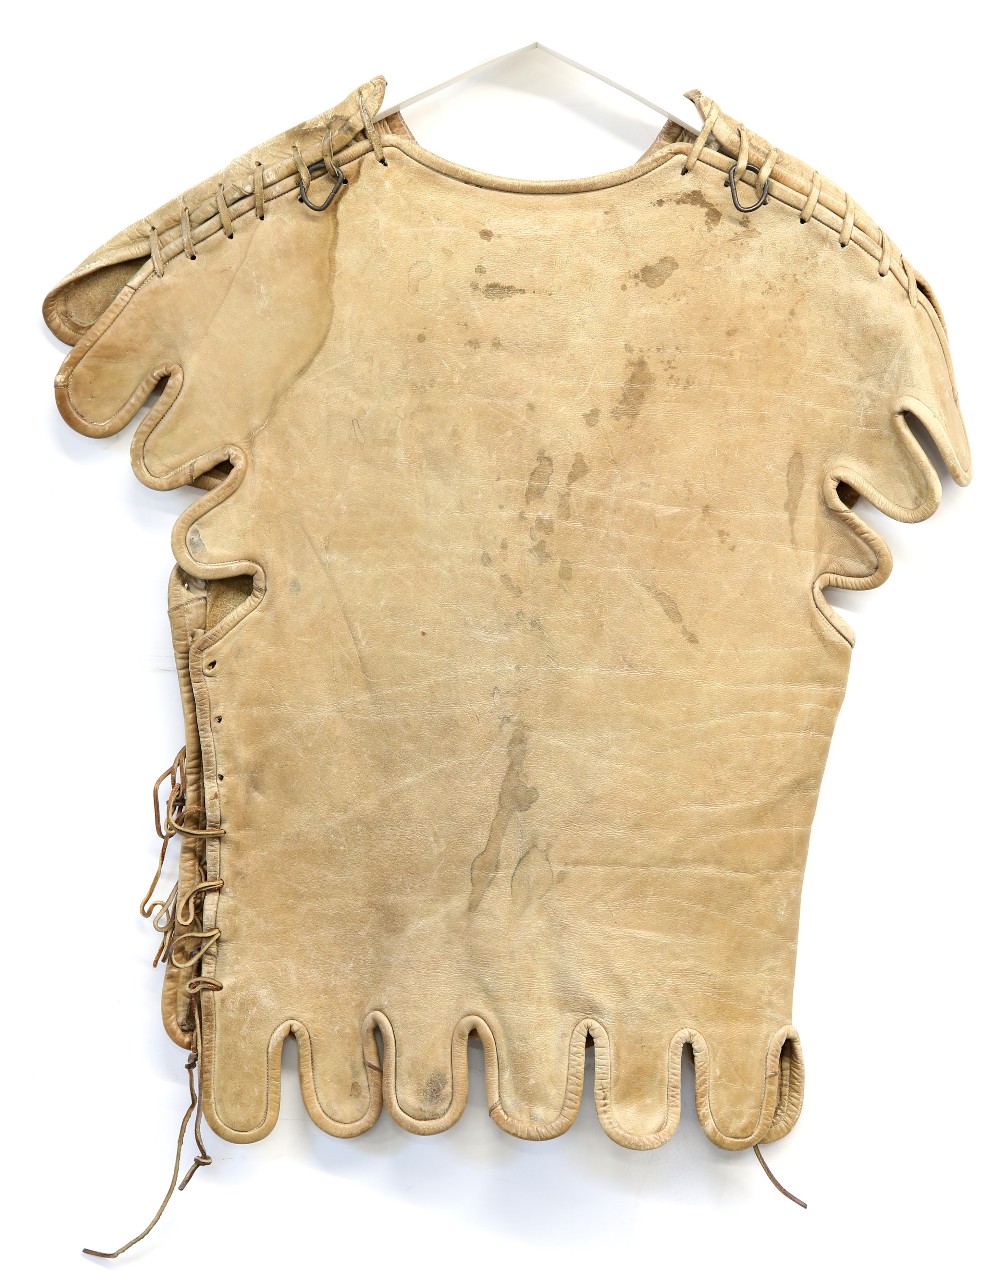 Leather Roman Cavalry tunic used in productions such as Cleopatra and Carry on Cleo. Western Costume - Image 3 of 4